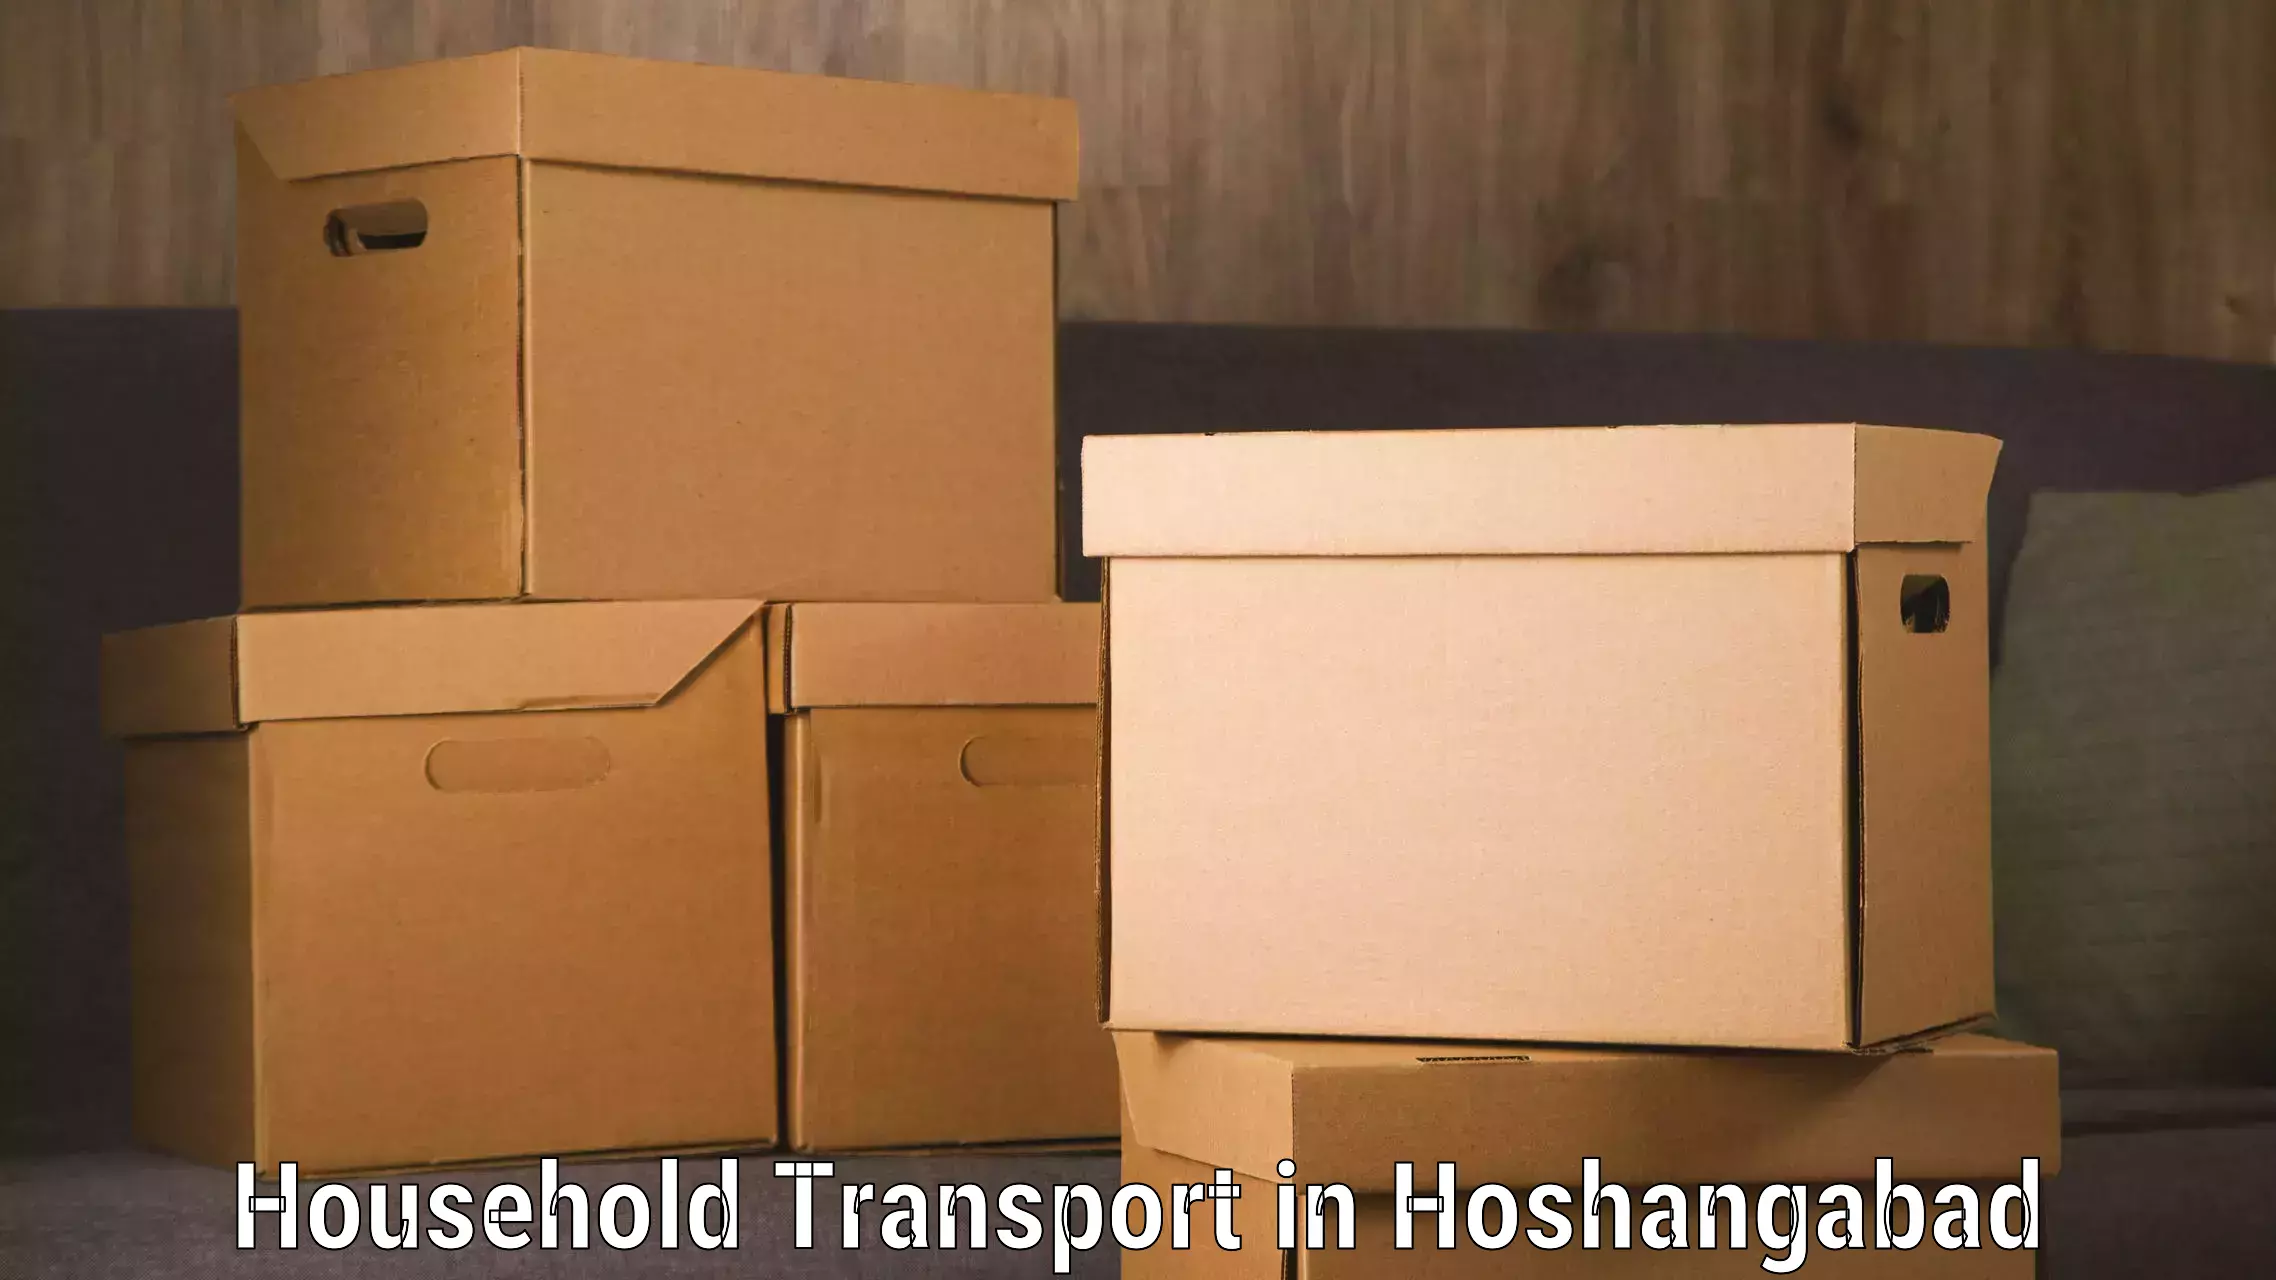 Home moving specialists in Hoshangabad